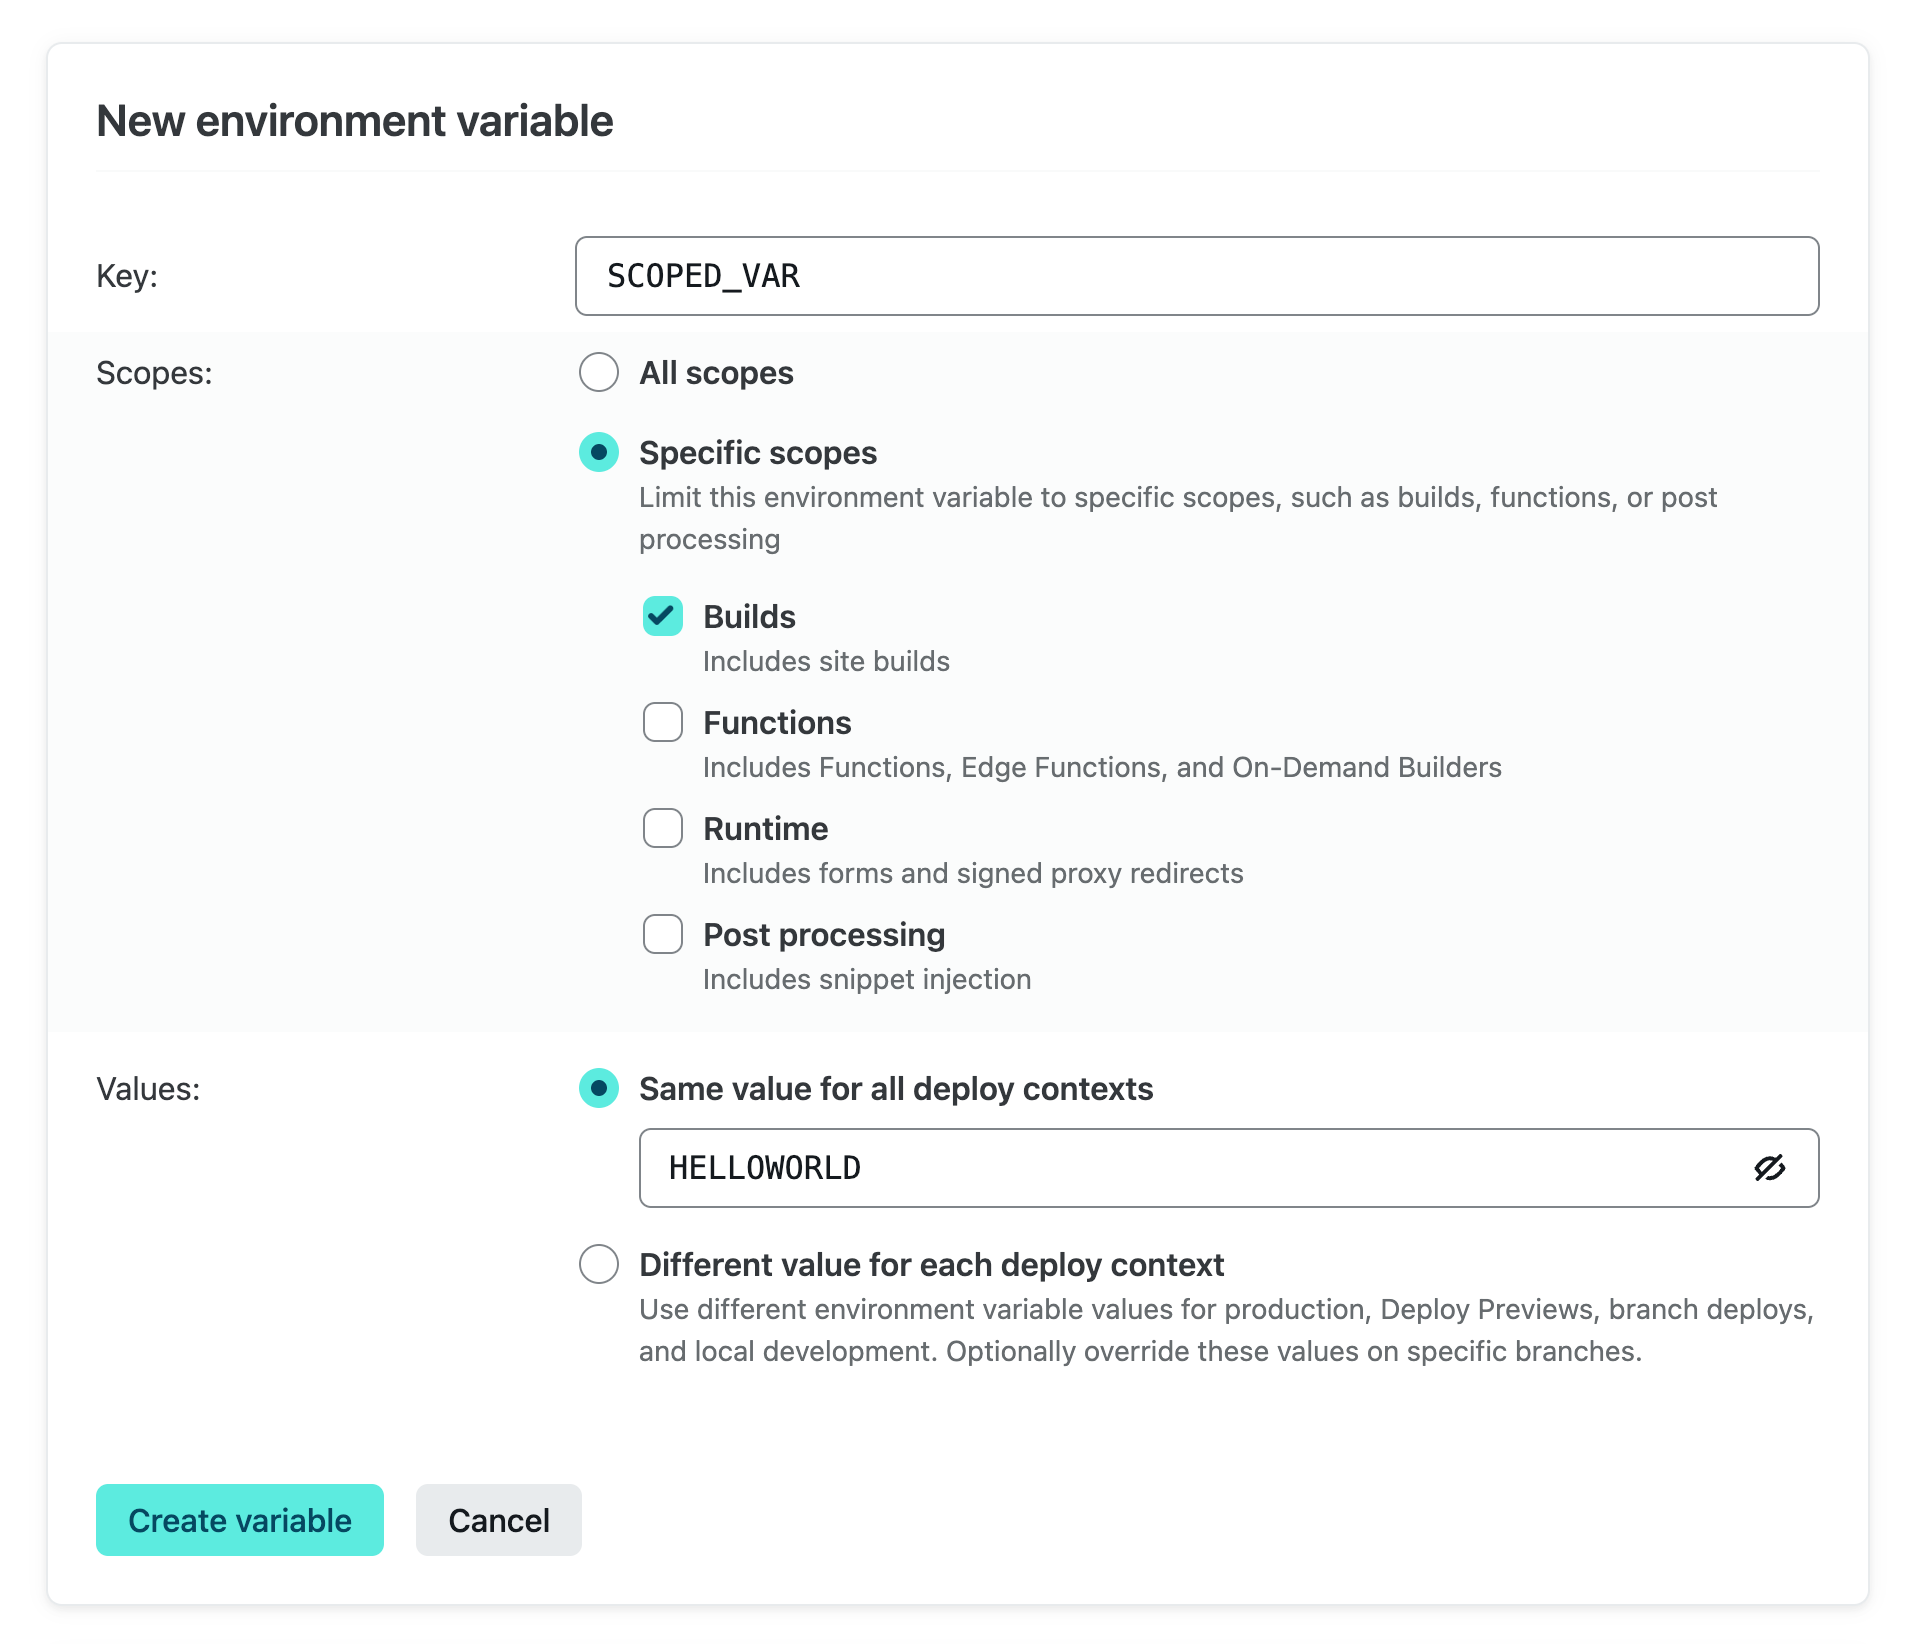 New environment variable experience